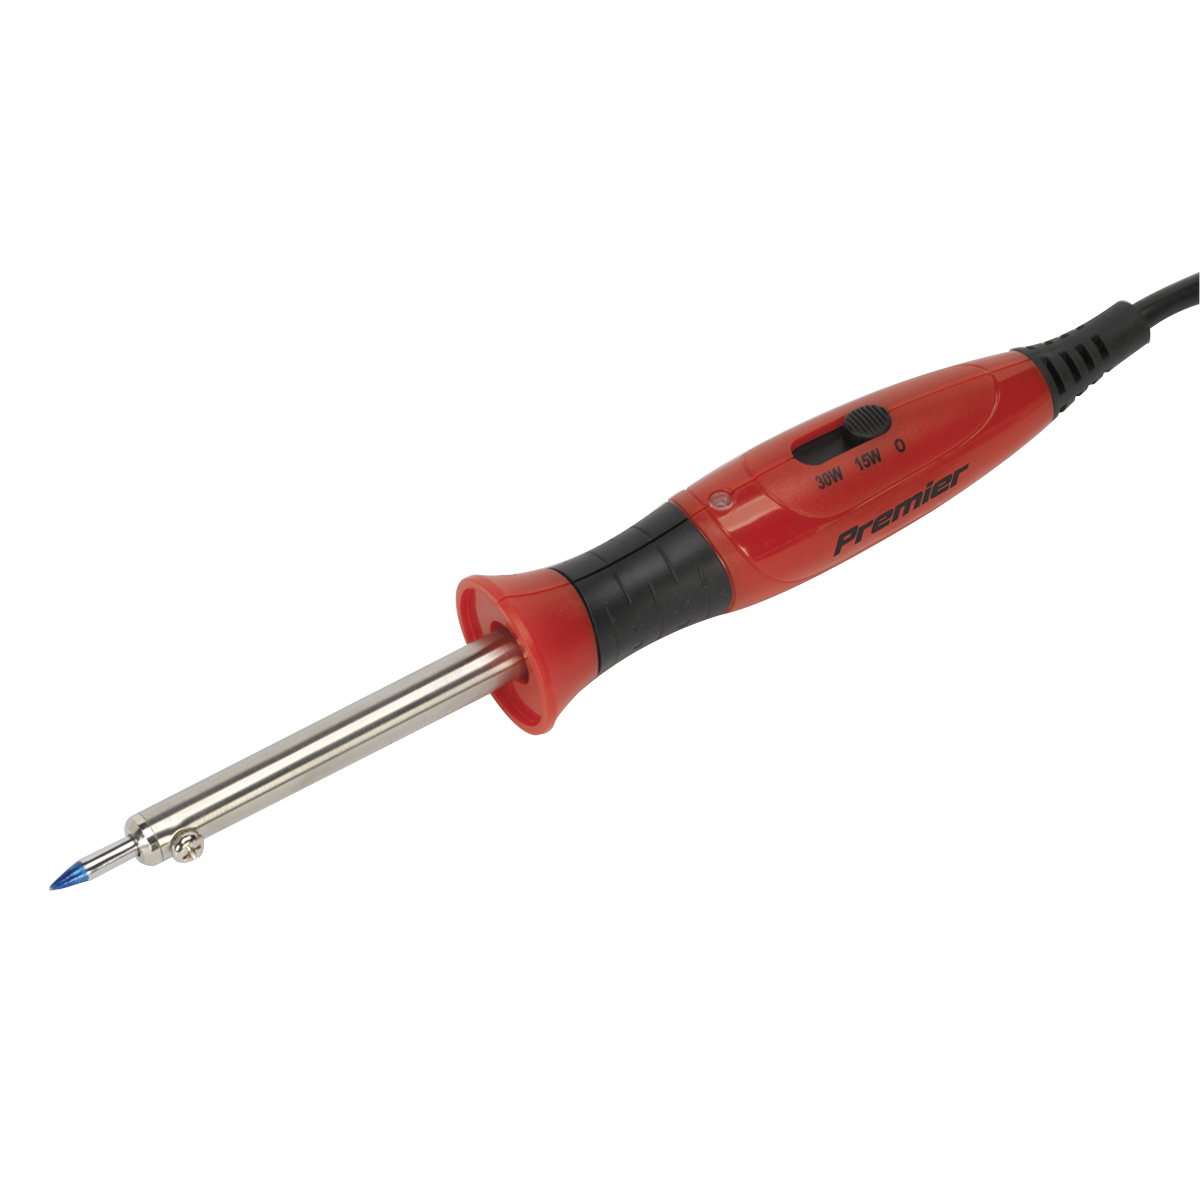 Professional Soldering Iron with Long-Life Tip Dual Wattage 15/30W/230V - SD1530 - Farming Parts